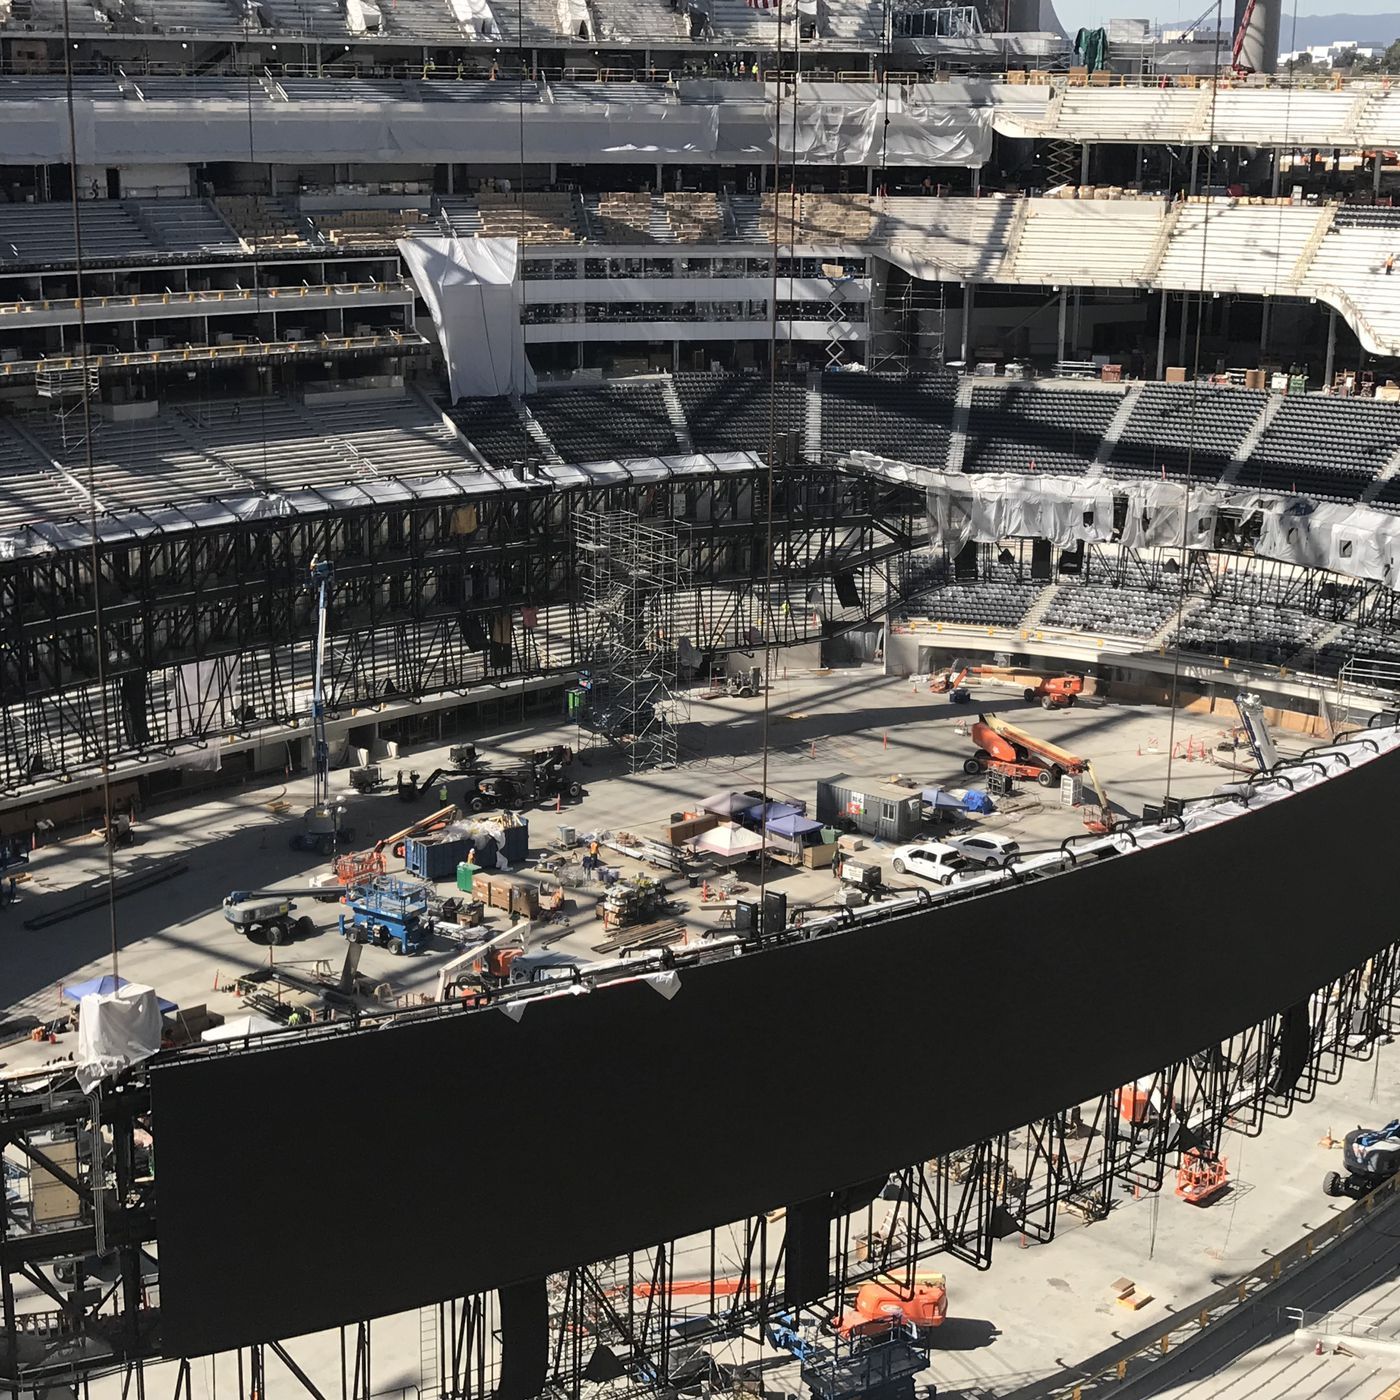 First look: Inside SoFi Stadium and its revolutionary 'Oculus' video board From The Blue